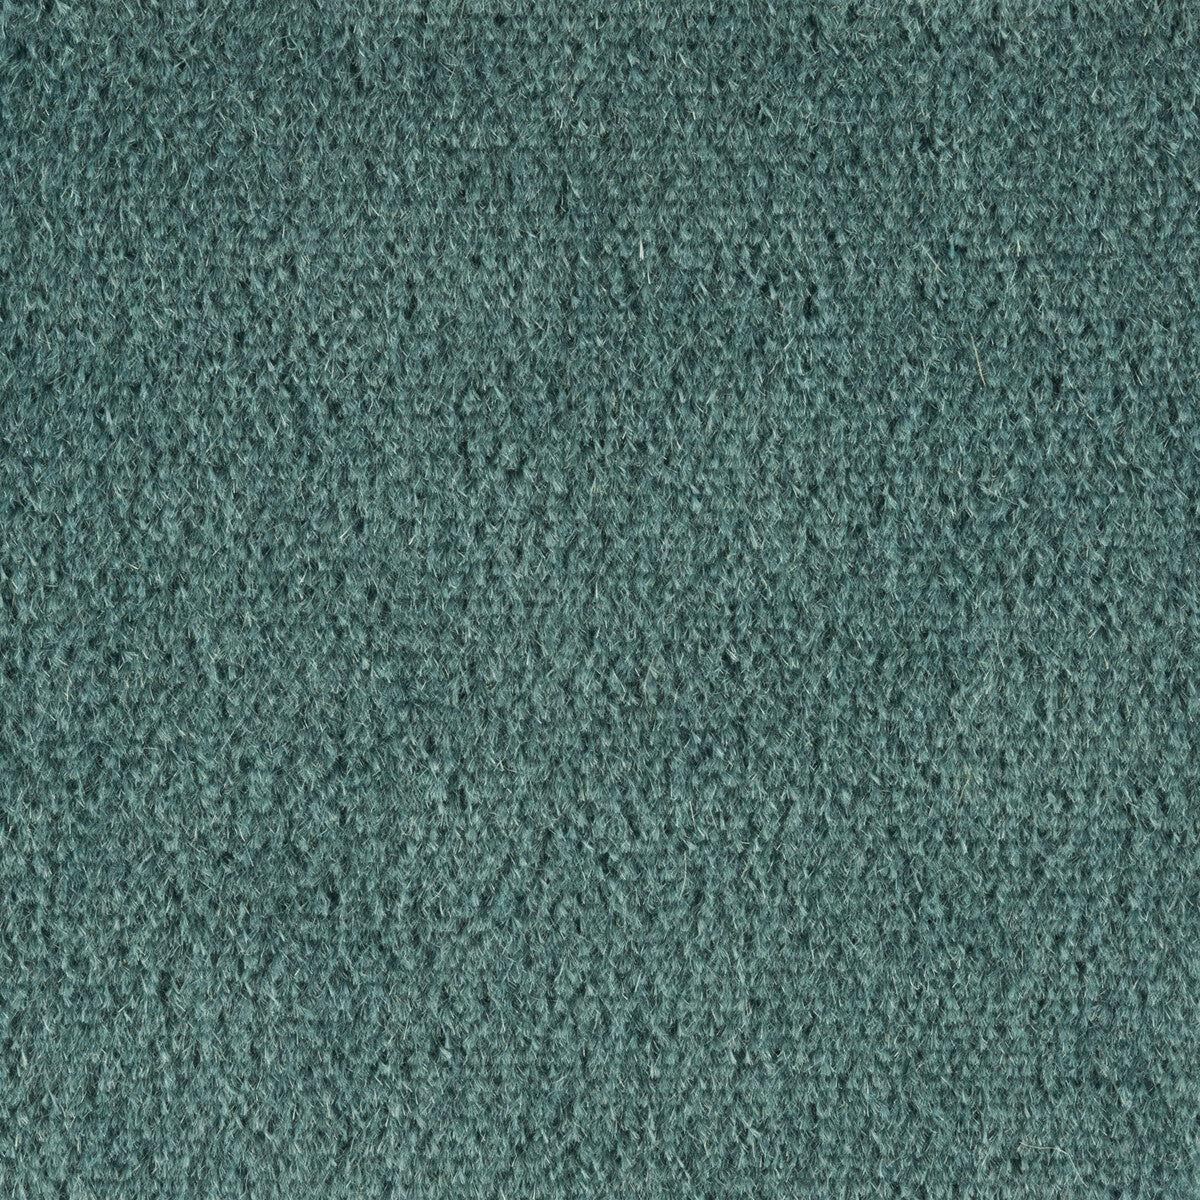 Plazzo Mohair fabric in cerulean color - pattern 34259.292.0 - by Kravet Couture